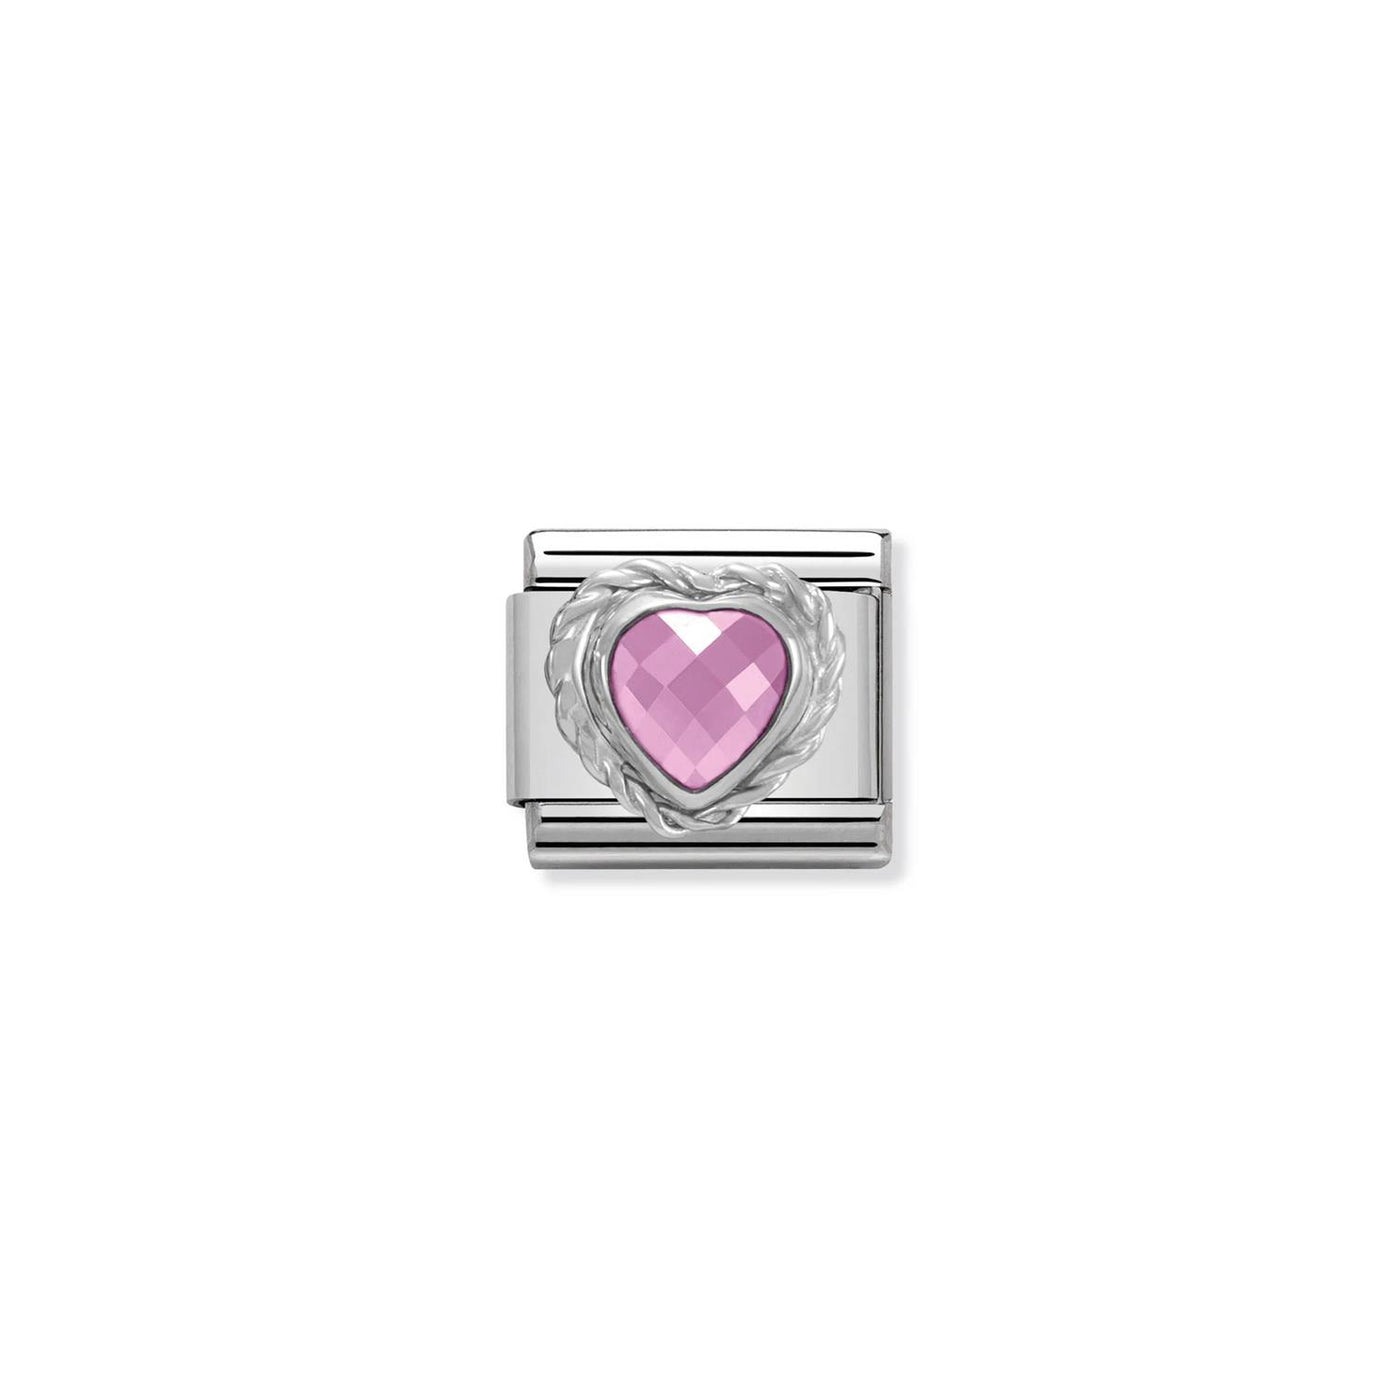 Heart Faceted CZ 925 sterling silver twisted setting and CZ Pink